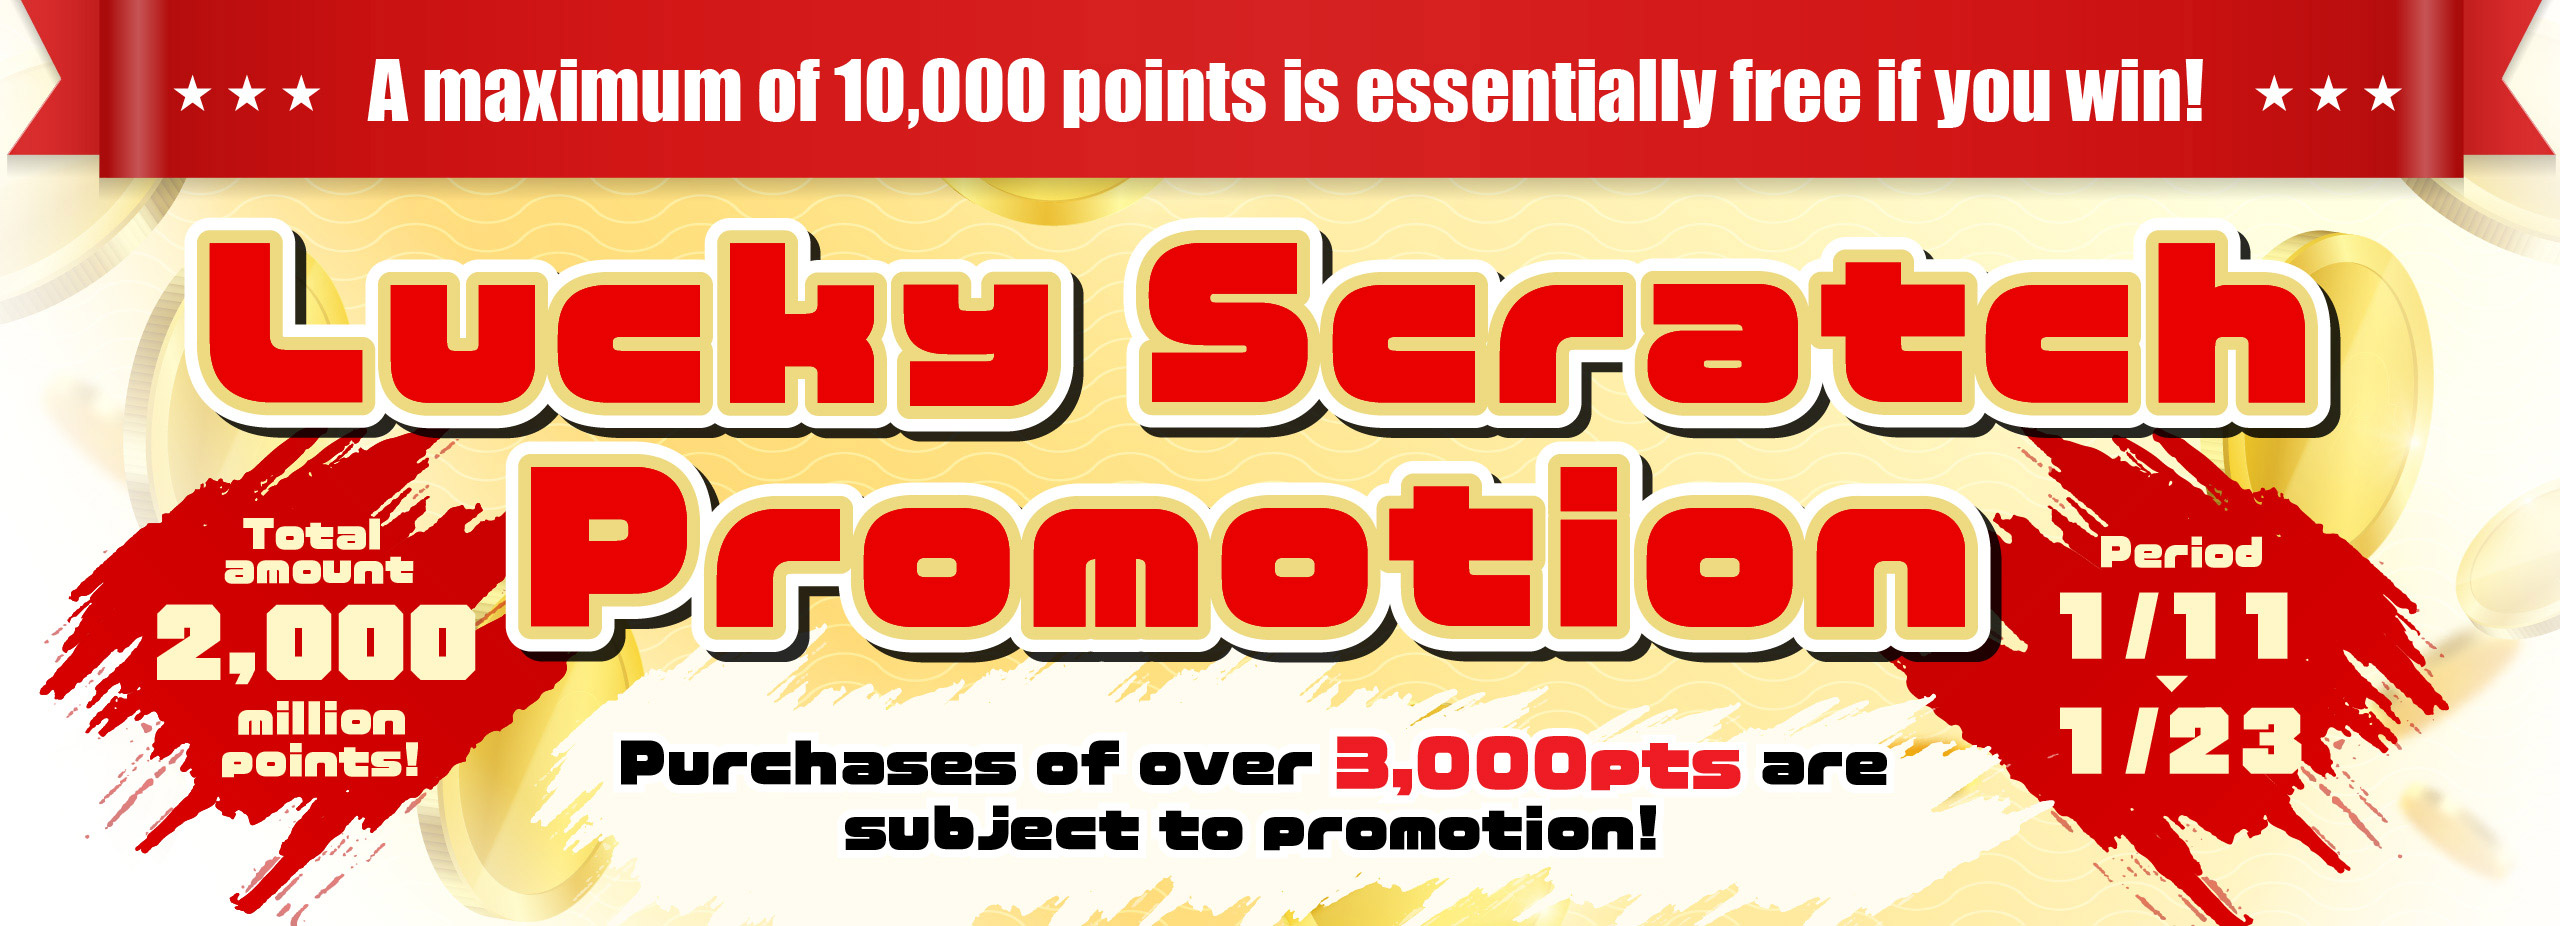 Total amount 20million points! A maximum of 10,000 points is essentially free if you win! Lucky Scratch Promotion Period 1/11 - 1/23 Purchases of over 3,000pts are subject to promotion!